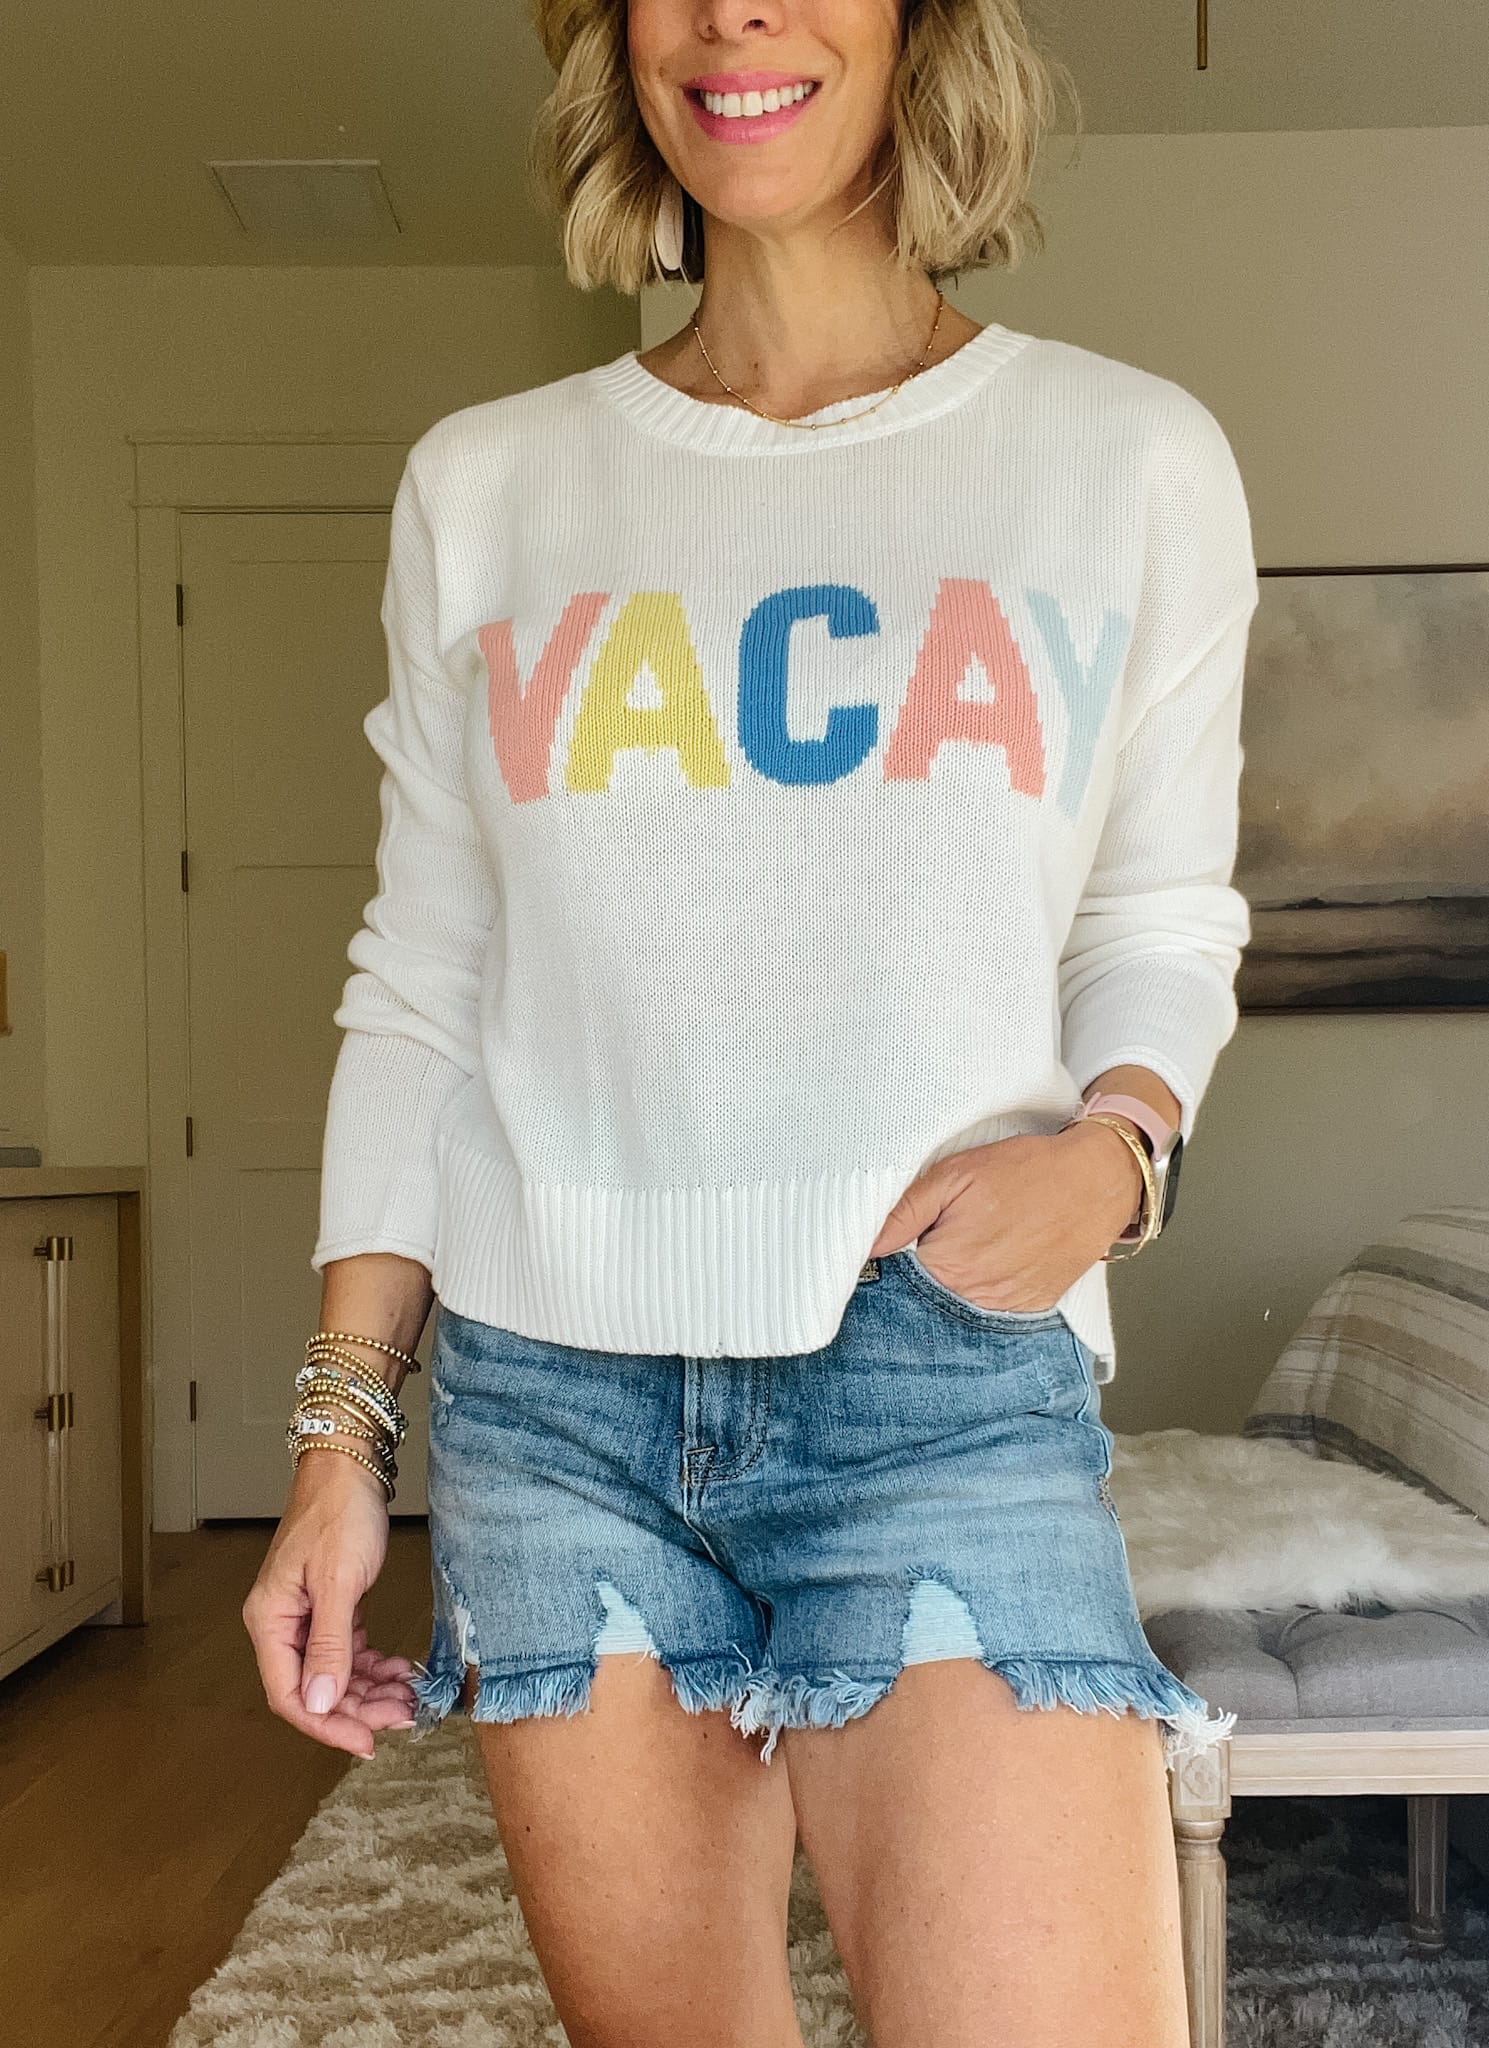 Vacay Sweater, Shorts, Sandals, Woven Bag 